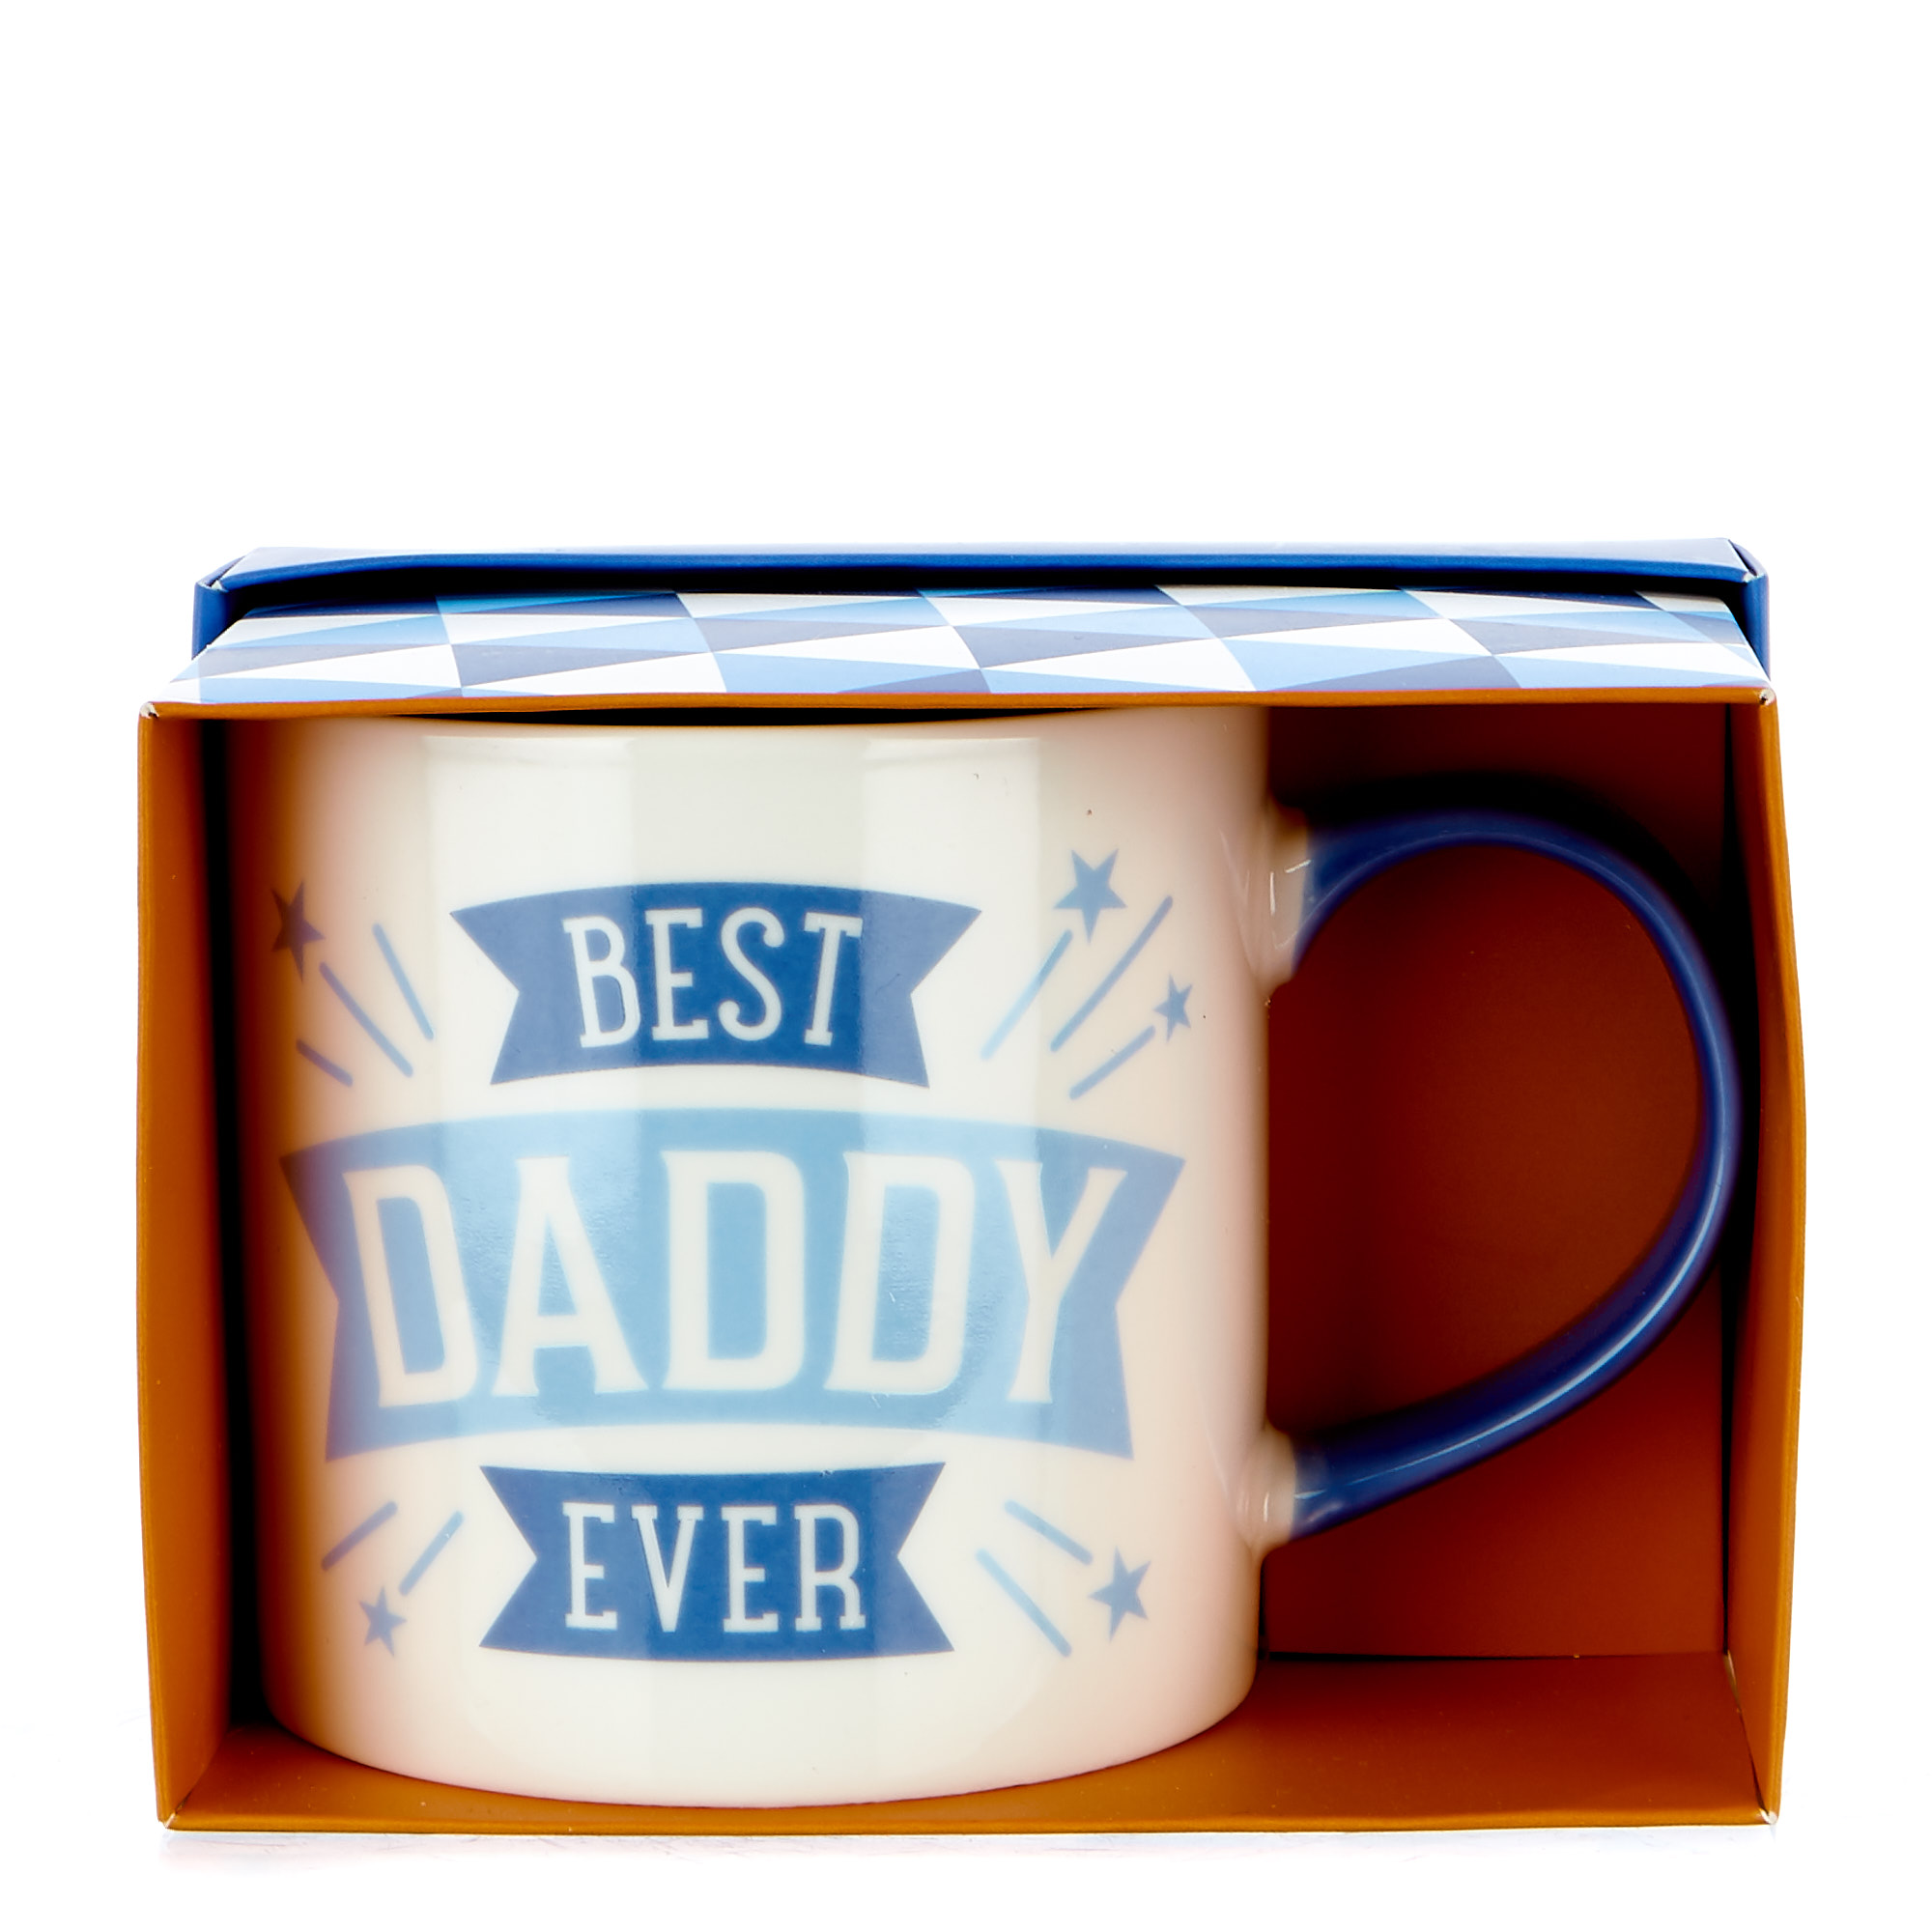 Buy Best Daddy Ever Mug for GBP 3.99 Card Factory UK